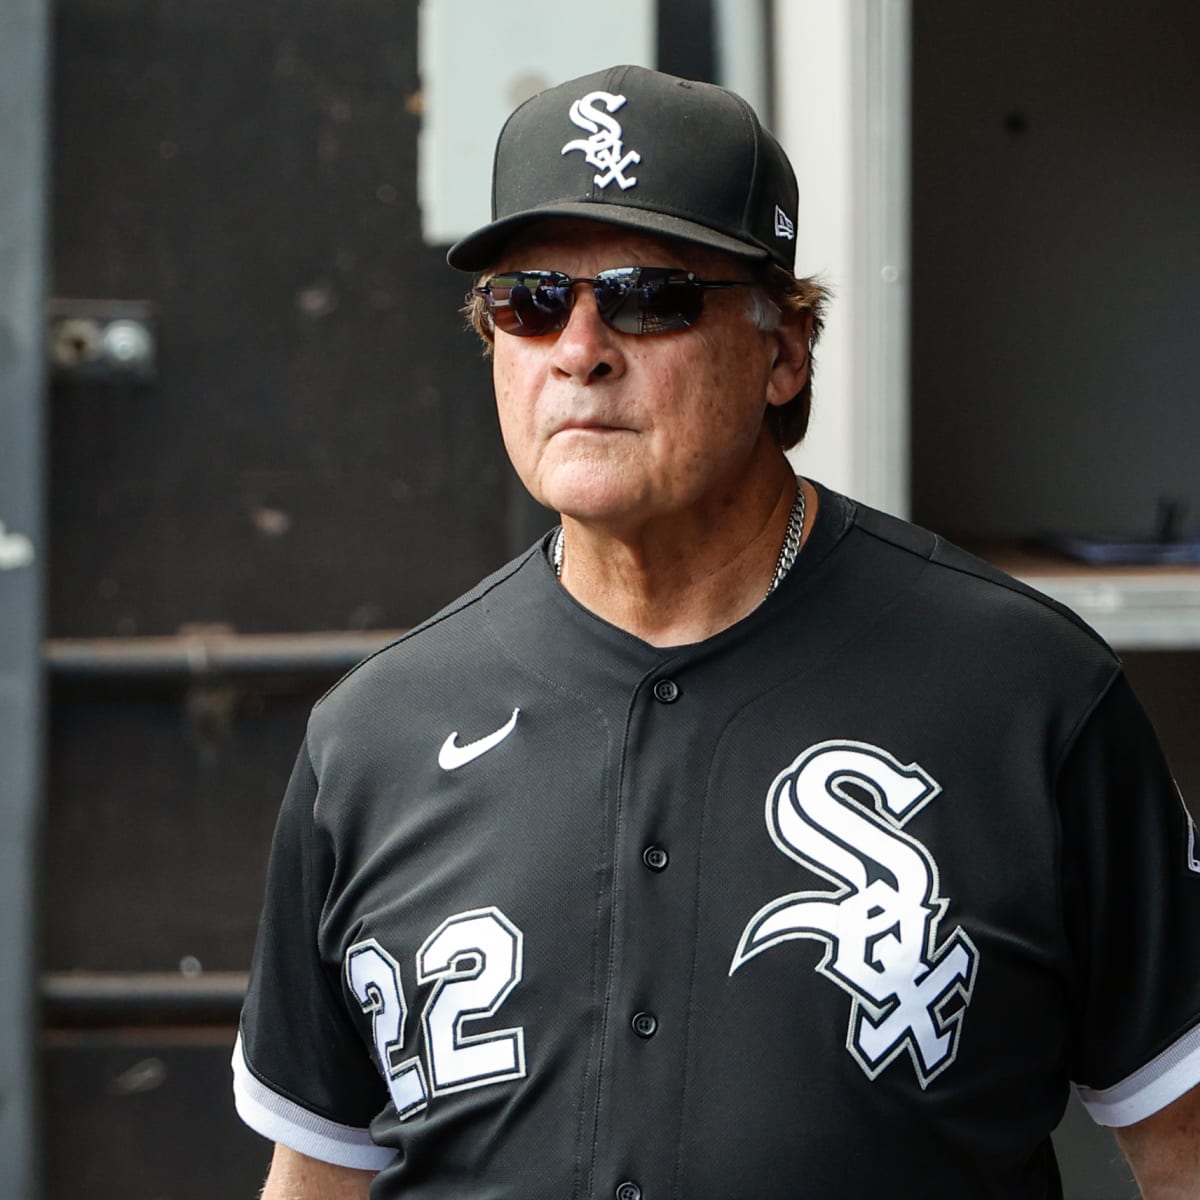 MLB rumors: White Sox's Tony LaRussa taps Yankees for new bench coach 